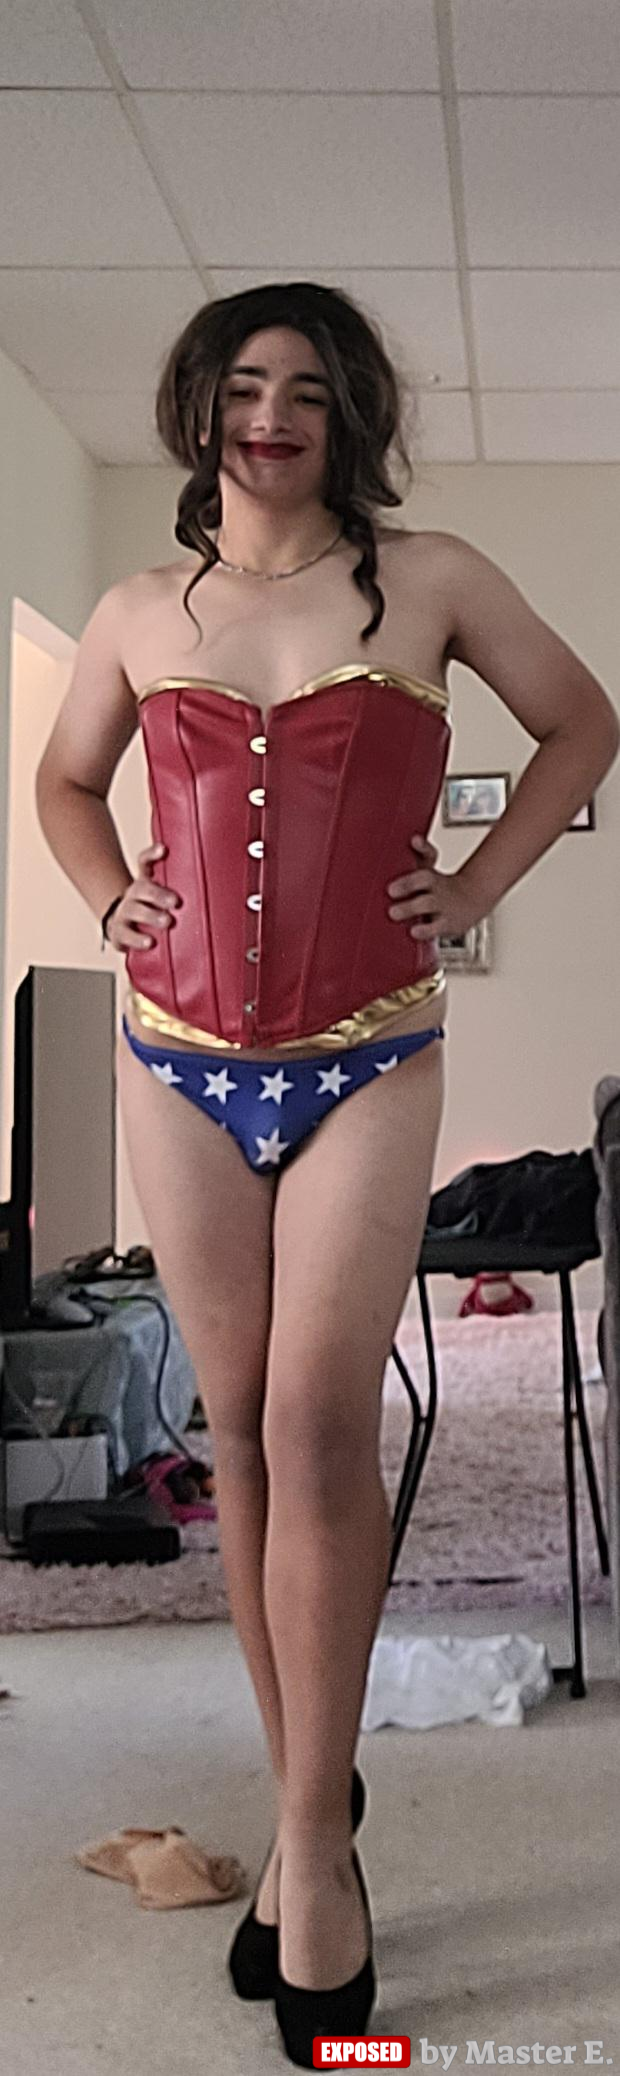 Sissy Hannah Jizzelle exposed in her Wonder Woman outfit!